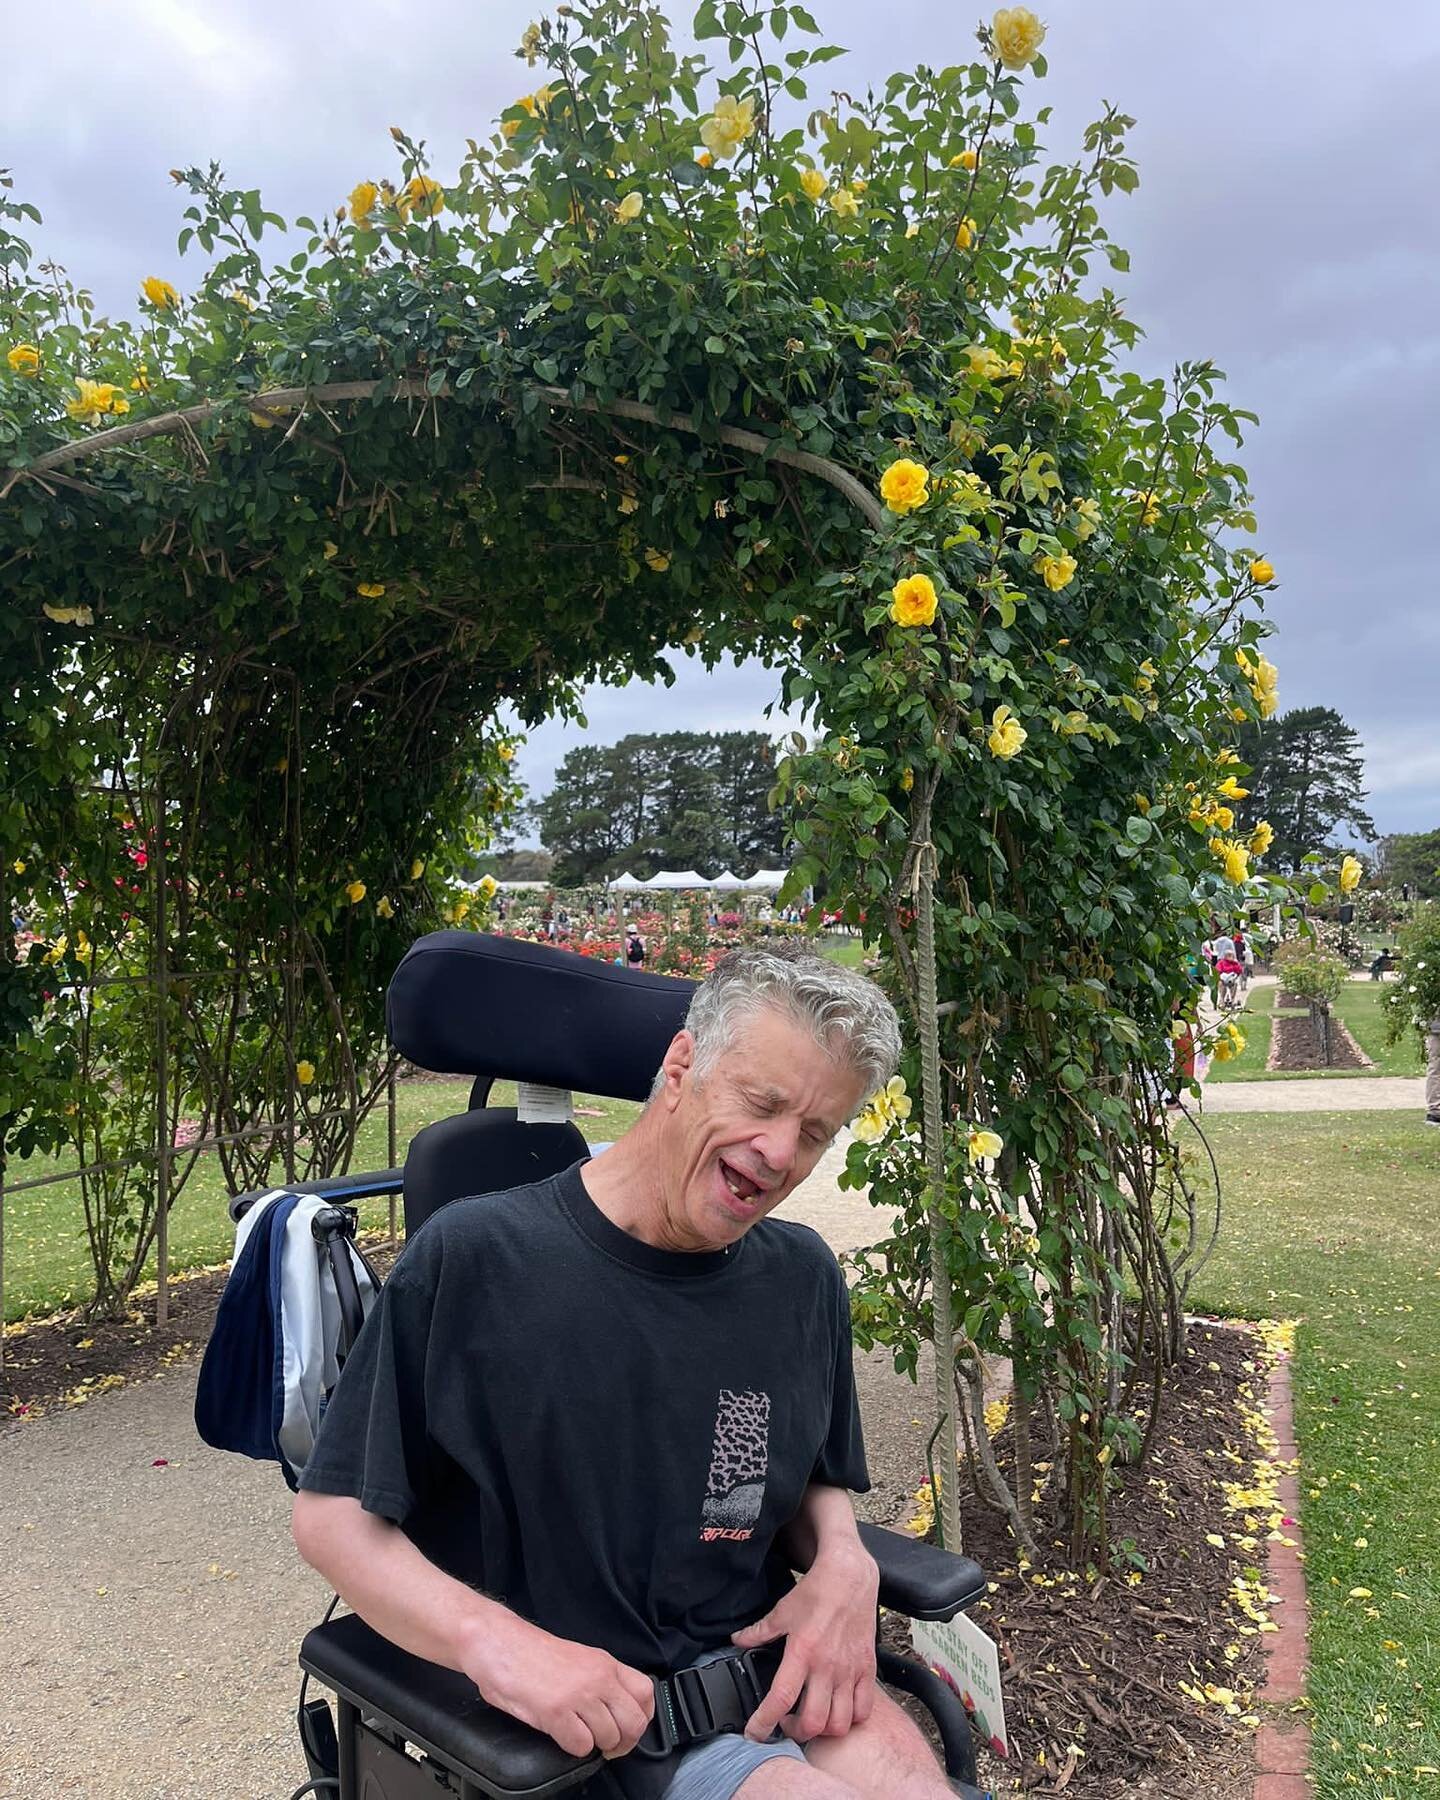 Beautiful day to check out the roses at the State Rose &amp; Gardens Show on the weekend, Wayne loved it! 🌸 🌹 

🏷️ 
#smallbusinessmelbourne #smallbusinessvictoria #ndis #ndissupport #ndisaustralia #ndissupportcoordination #supportcoordination #dis